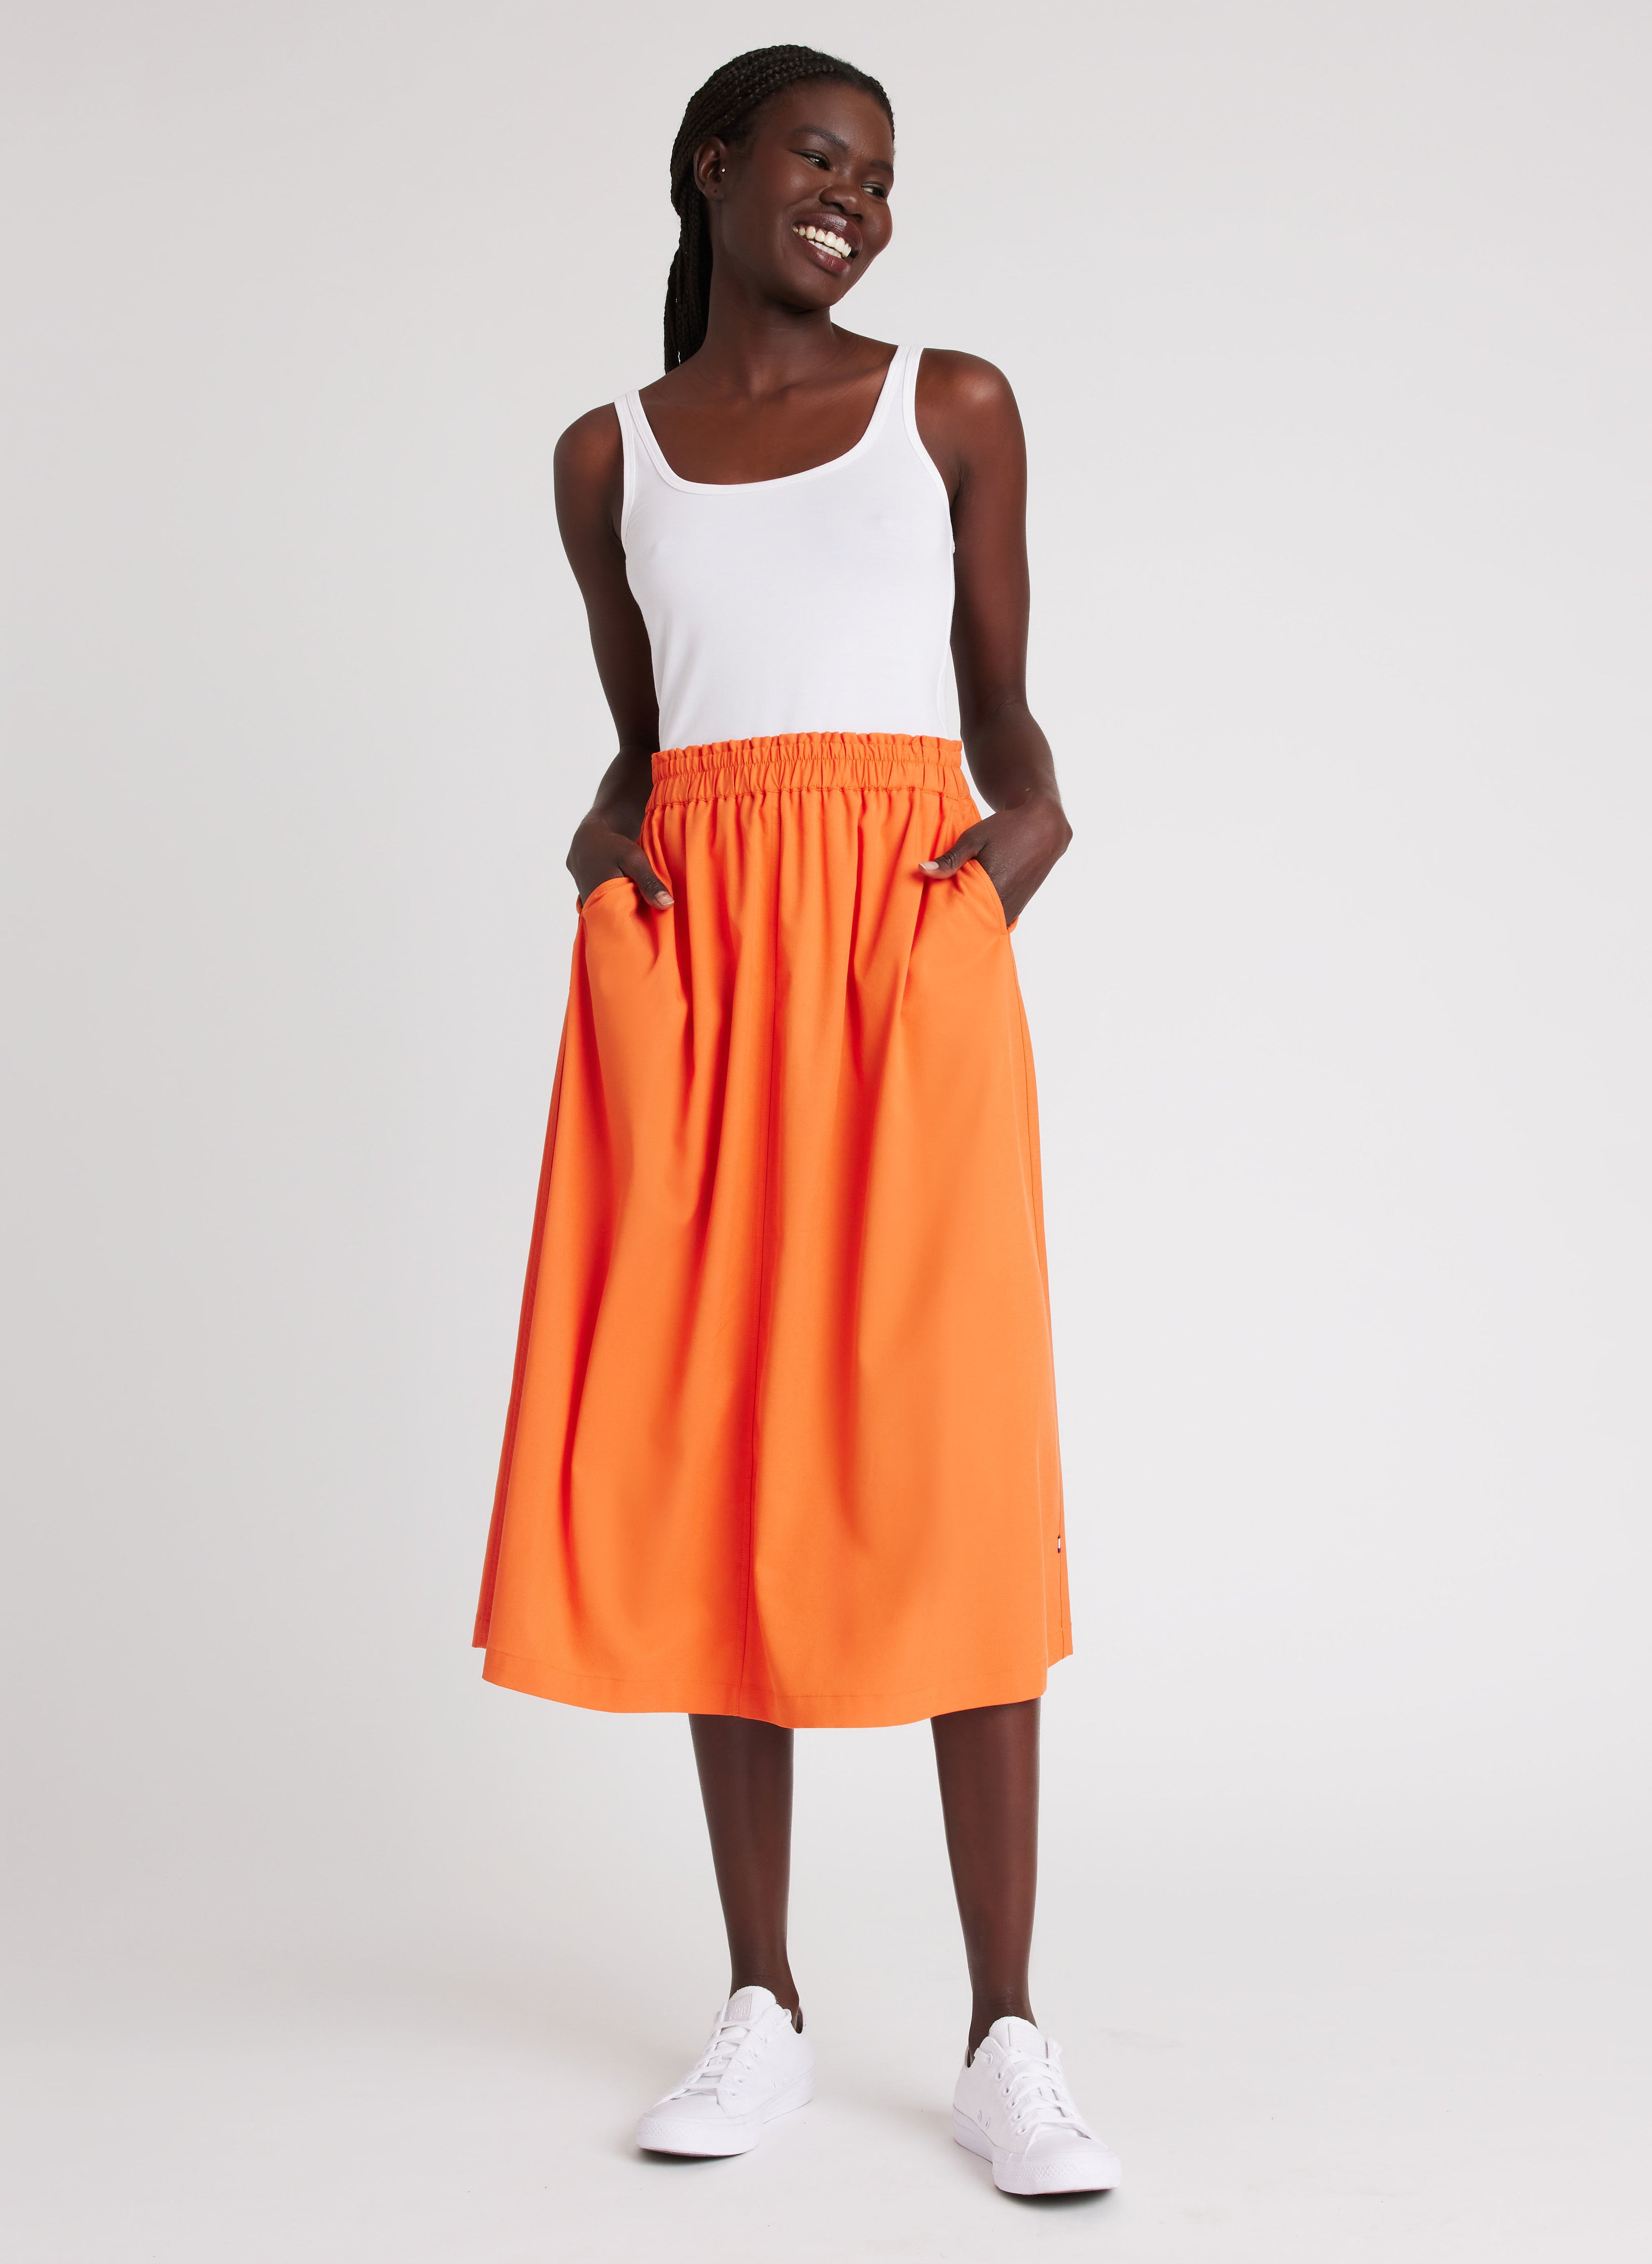 Kit and Ace — Sublime A Line Skirt